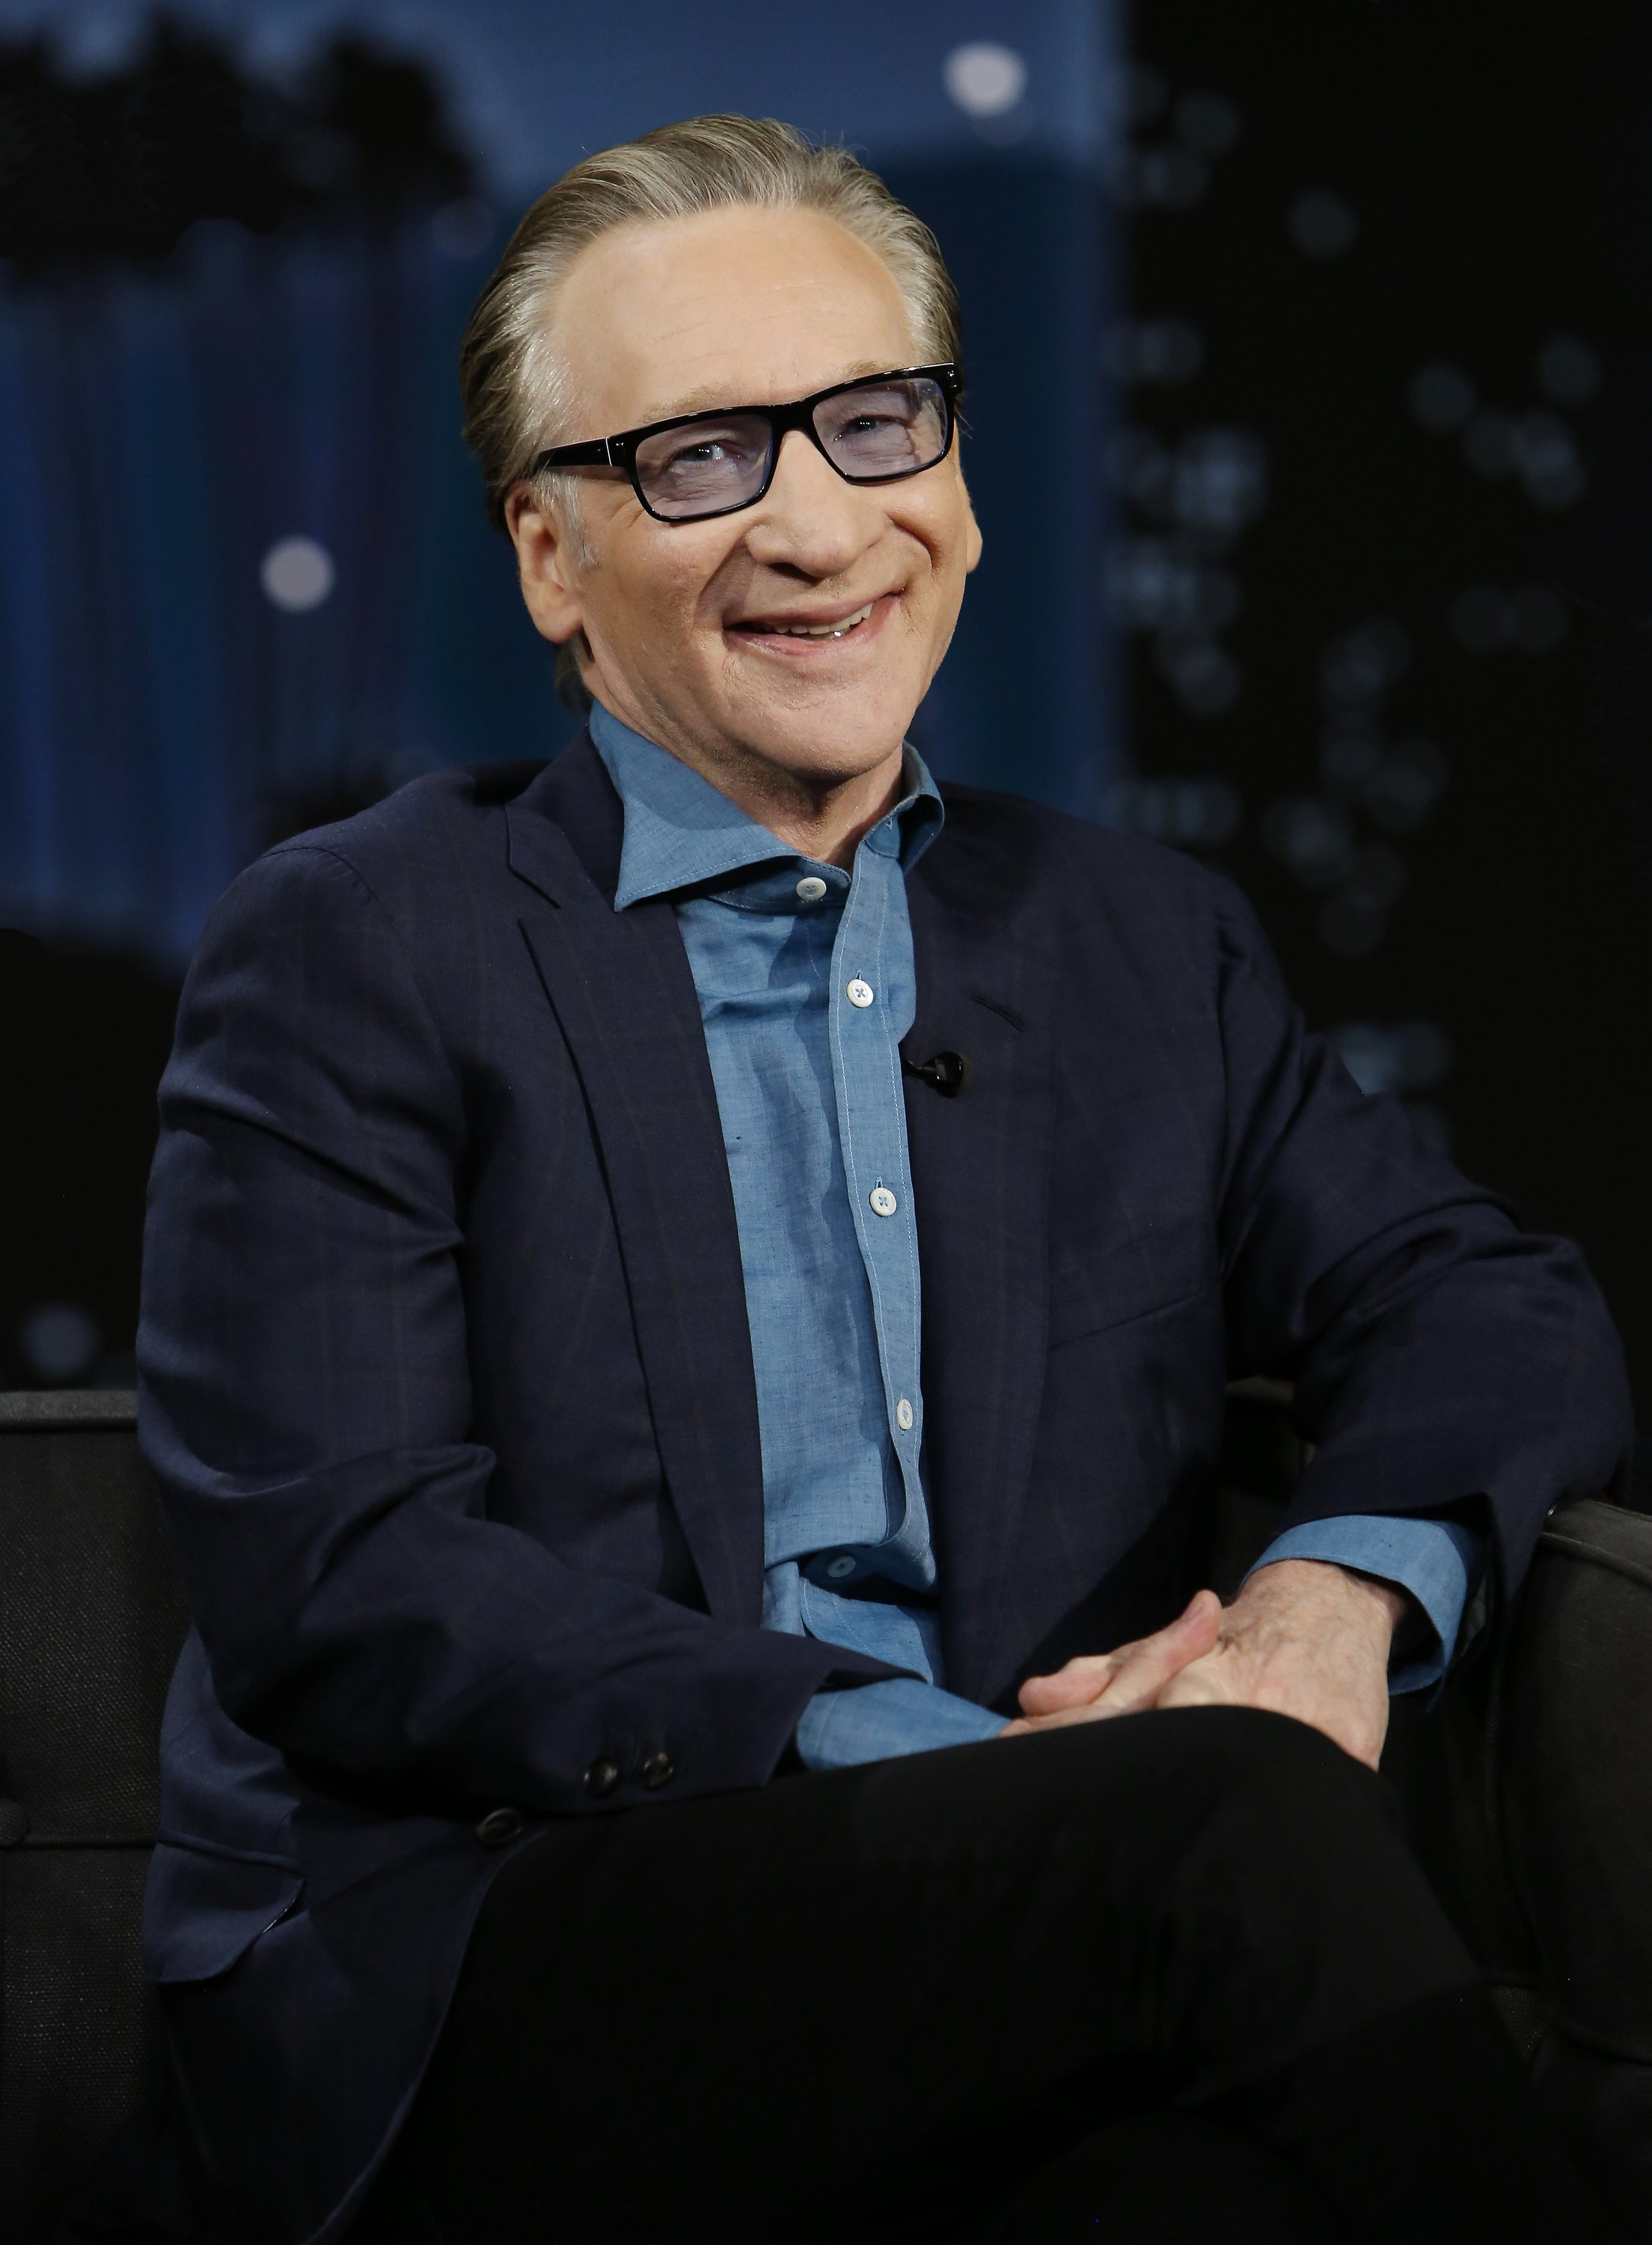 Bill Maher on "Jimmy Kimmel Live!" on April 13, 2022 | Source: Getty Images